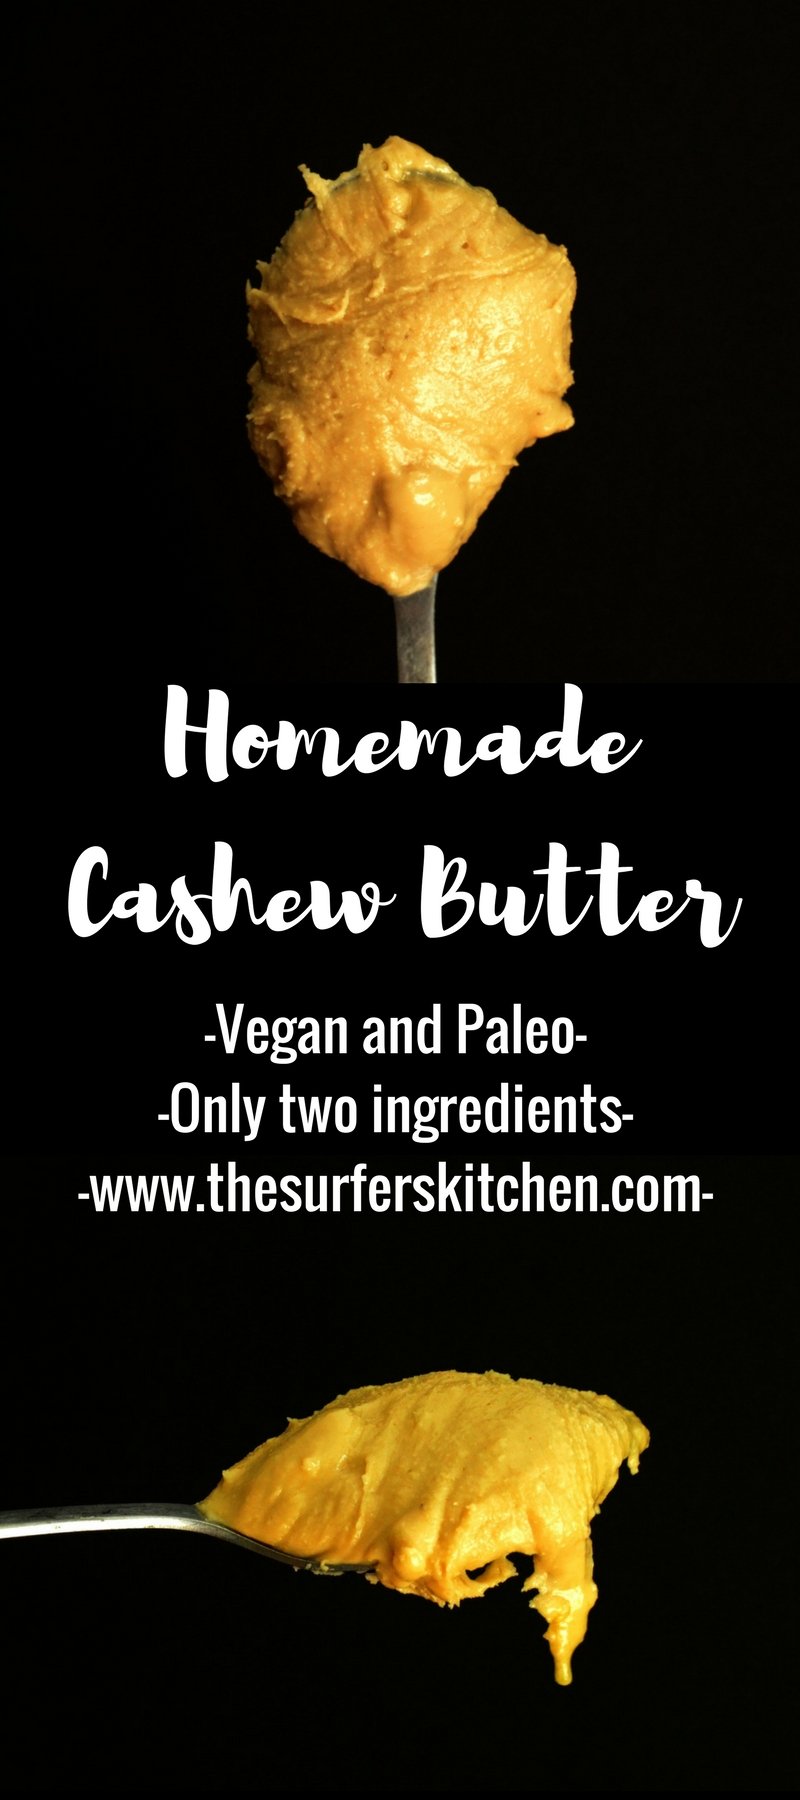 Homemade Cashew Butter | Who knew that cashew butter would be so useful to have around the house and so easy to make? Two ingredients and 15 minutes for your own batch. | www.thesurferskitchen.com